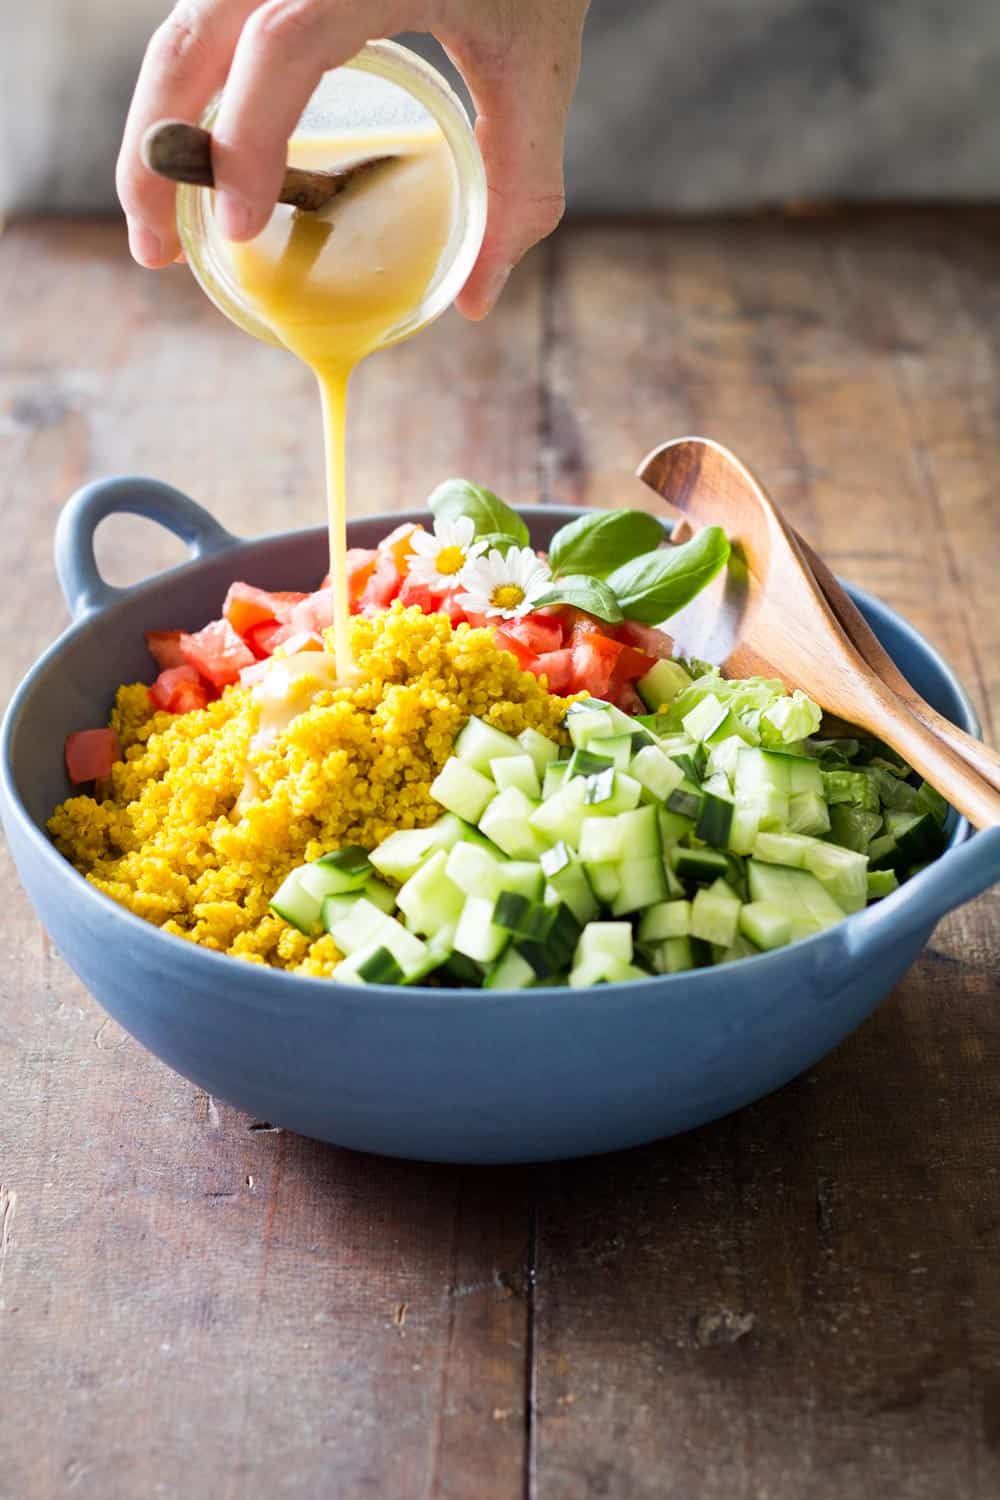 Honey mustard dressing being poured over a bowl of Turmeric Quinoa Salad and a wooden salad spoon.